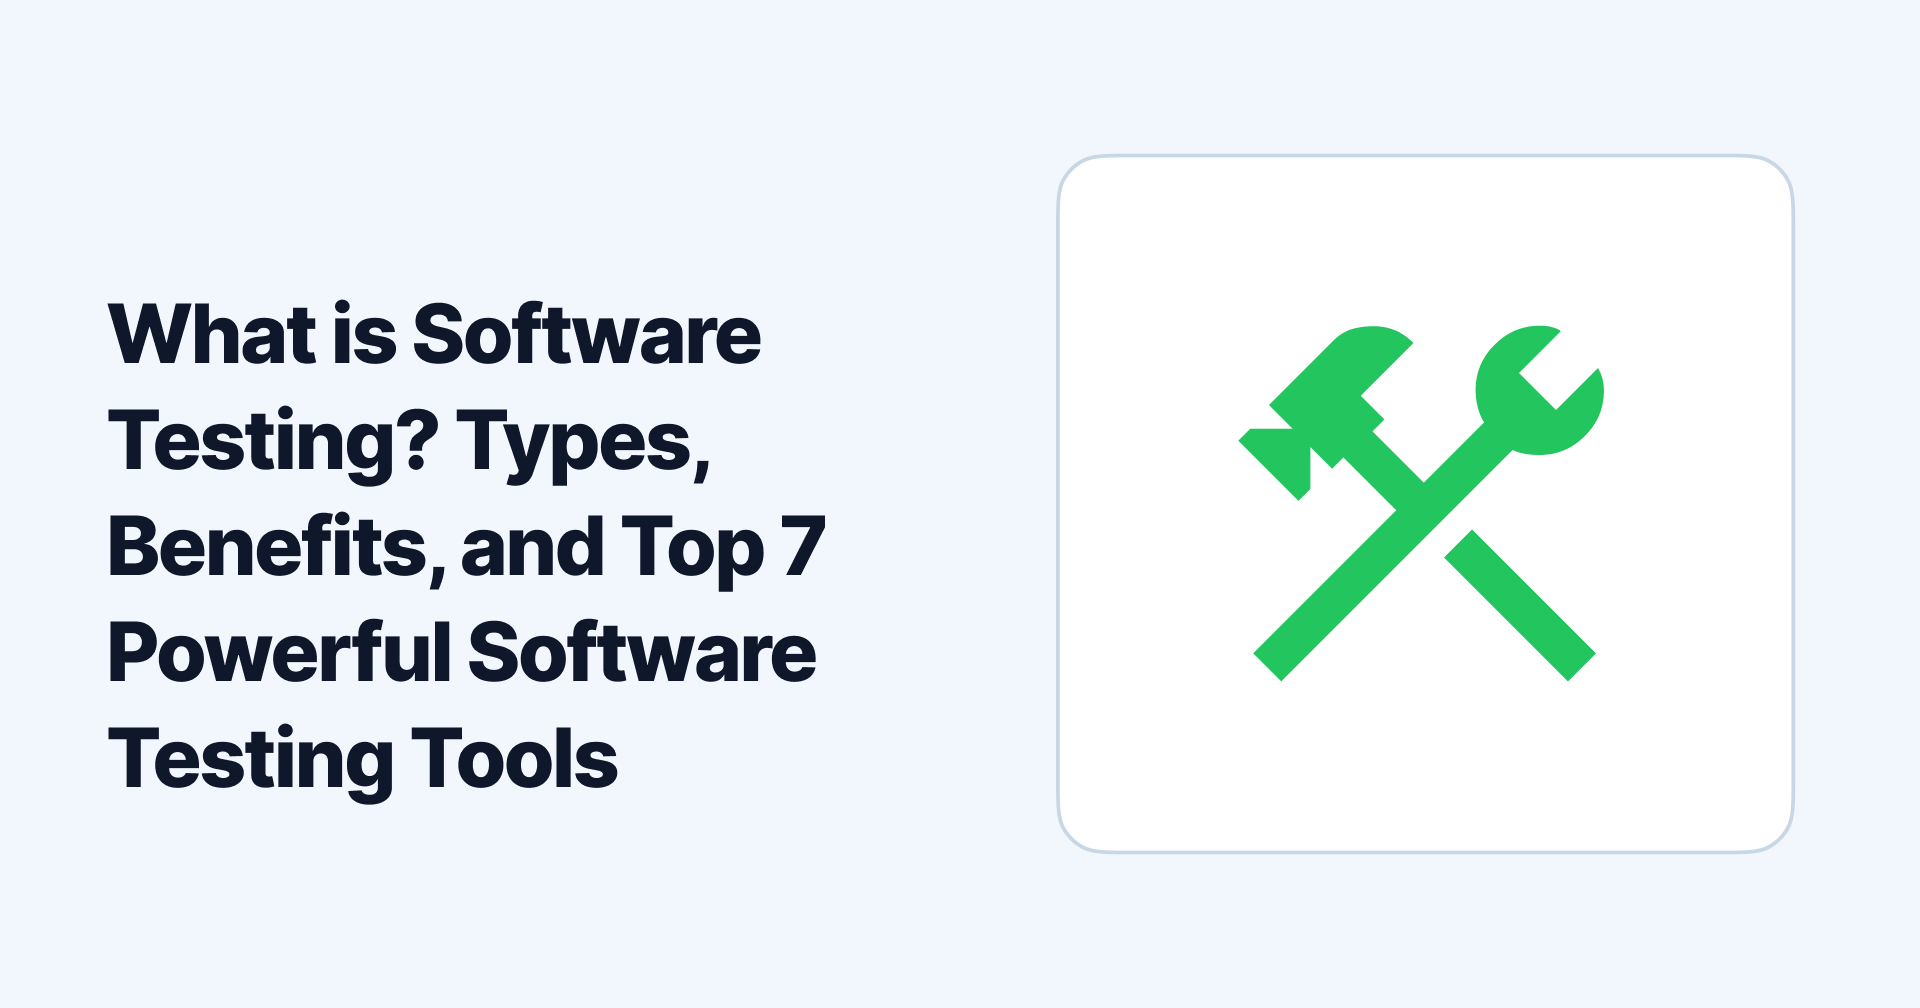 What is Software Testing? Types, Benefits, and Top 7 Powerful Software Testing Tools